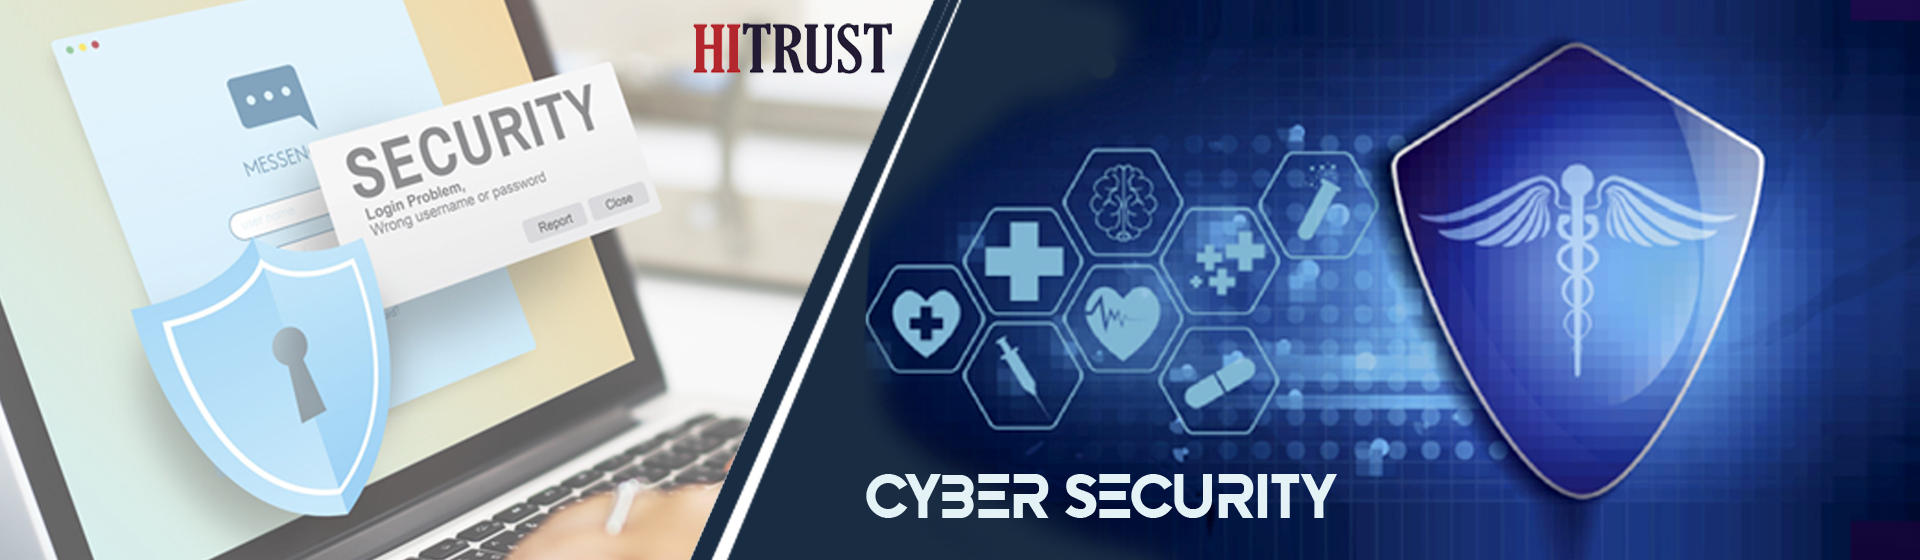 CREO Tech Solution provides the Cyber Security services and protects  clients valuable information and data from Cyber attacks and hackers.